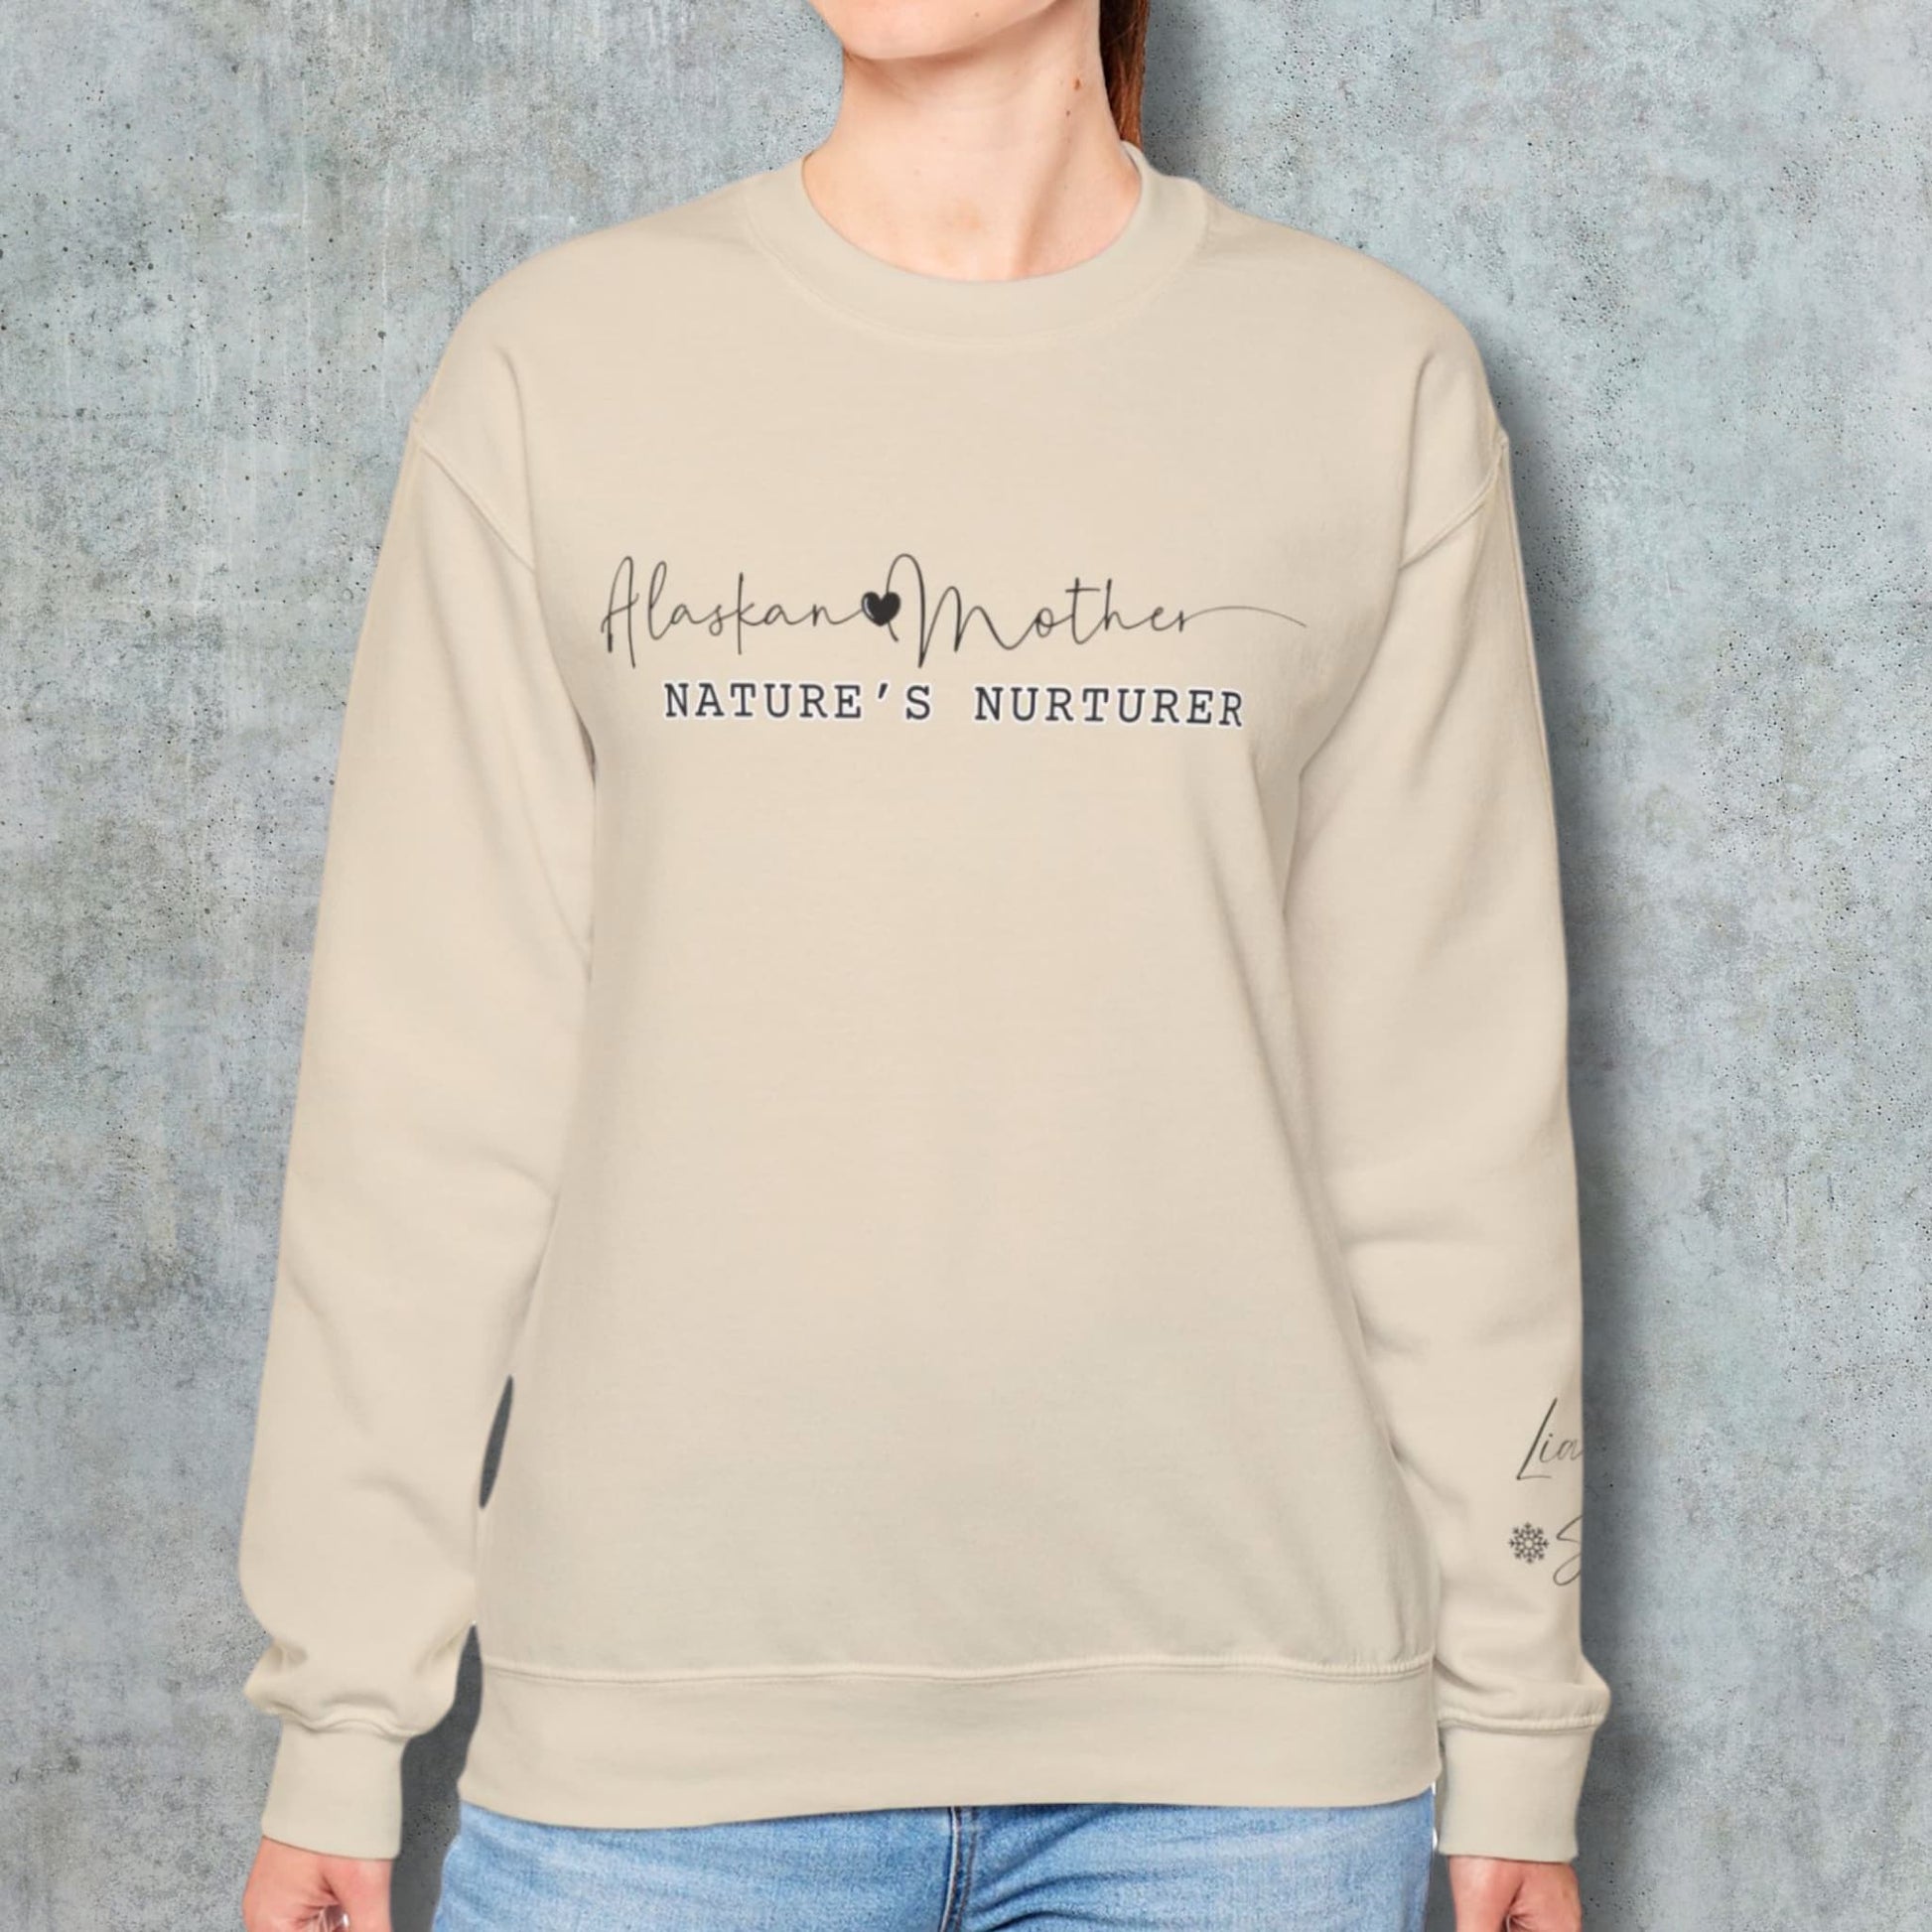 Woman modeling the Alaskan Mother Personalized Crewneck Sweatshirt against a wall background, showcasing the comfortable fit and style.